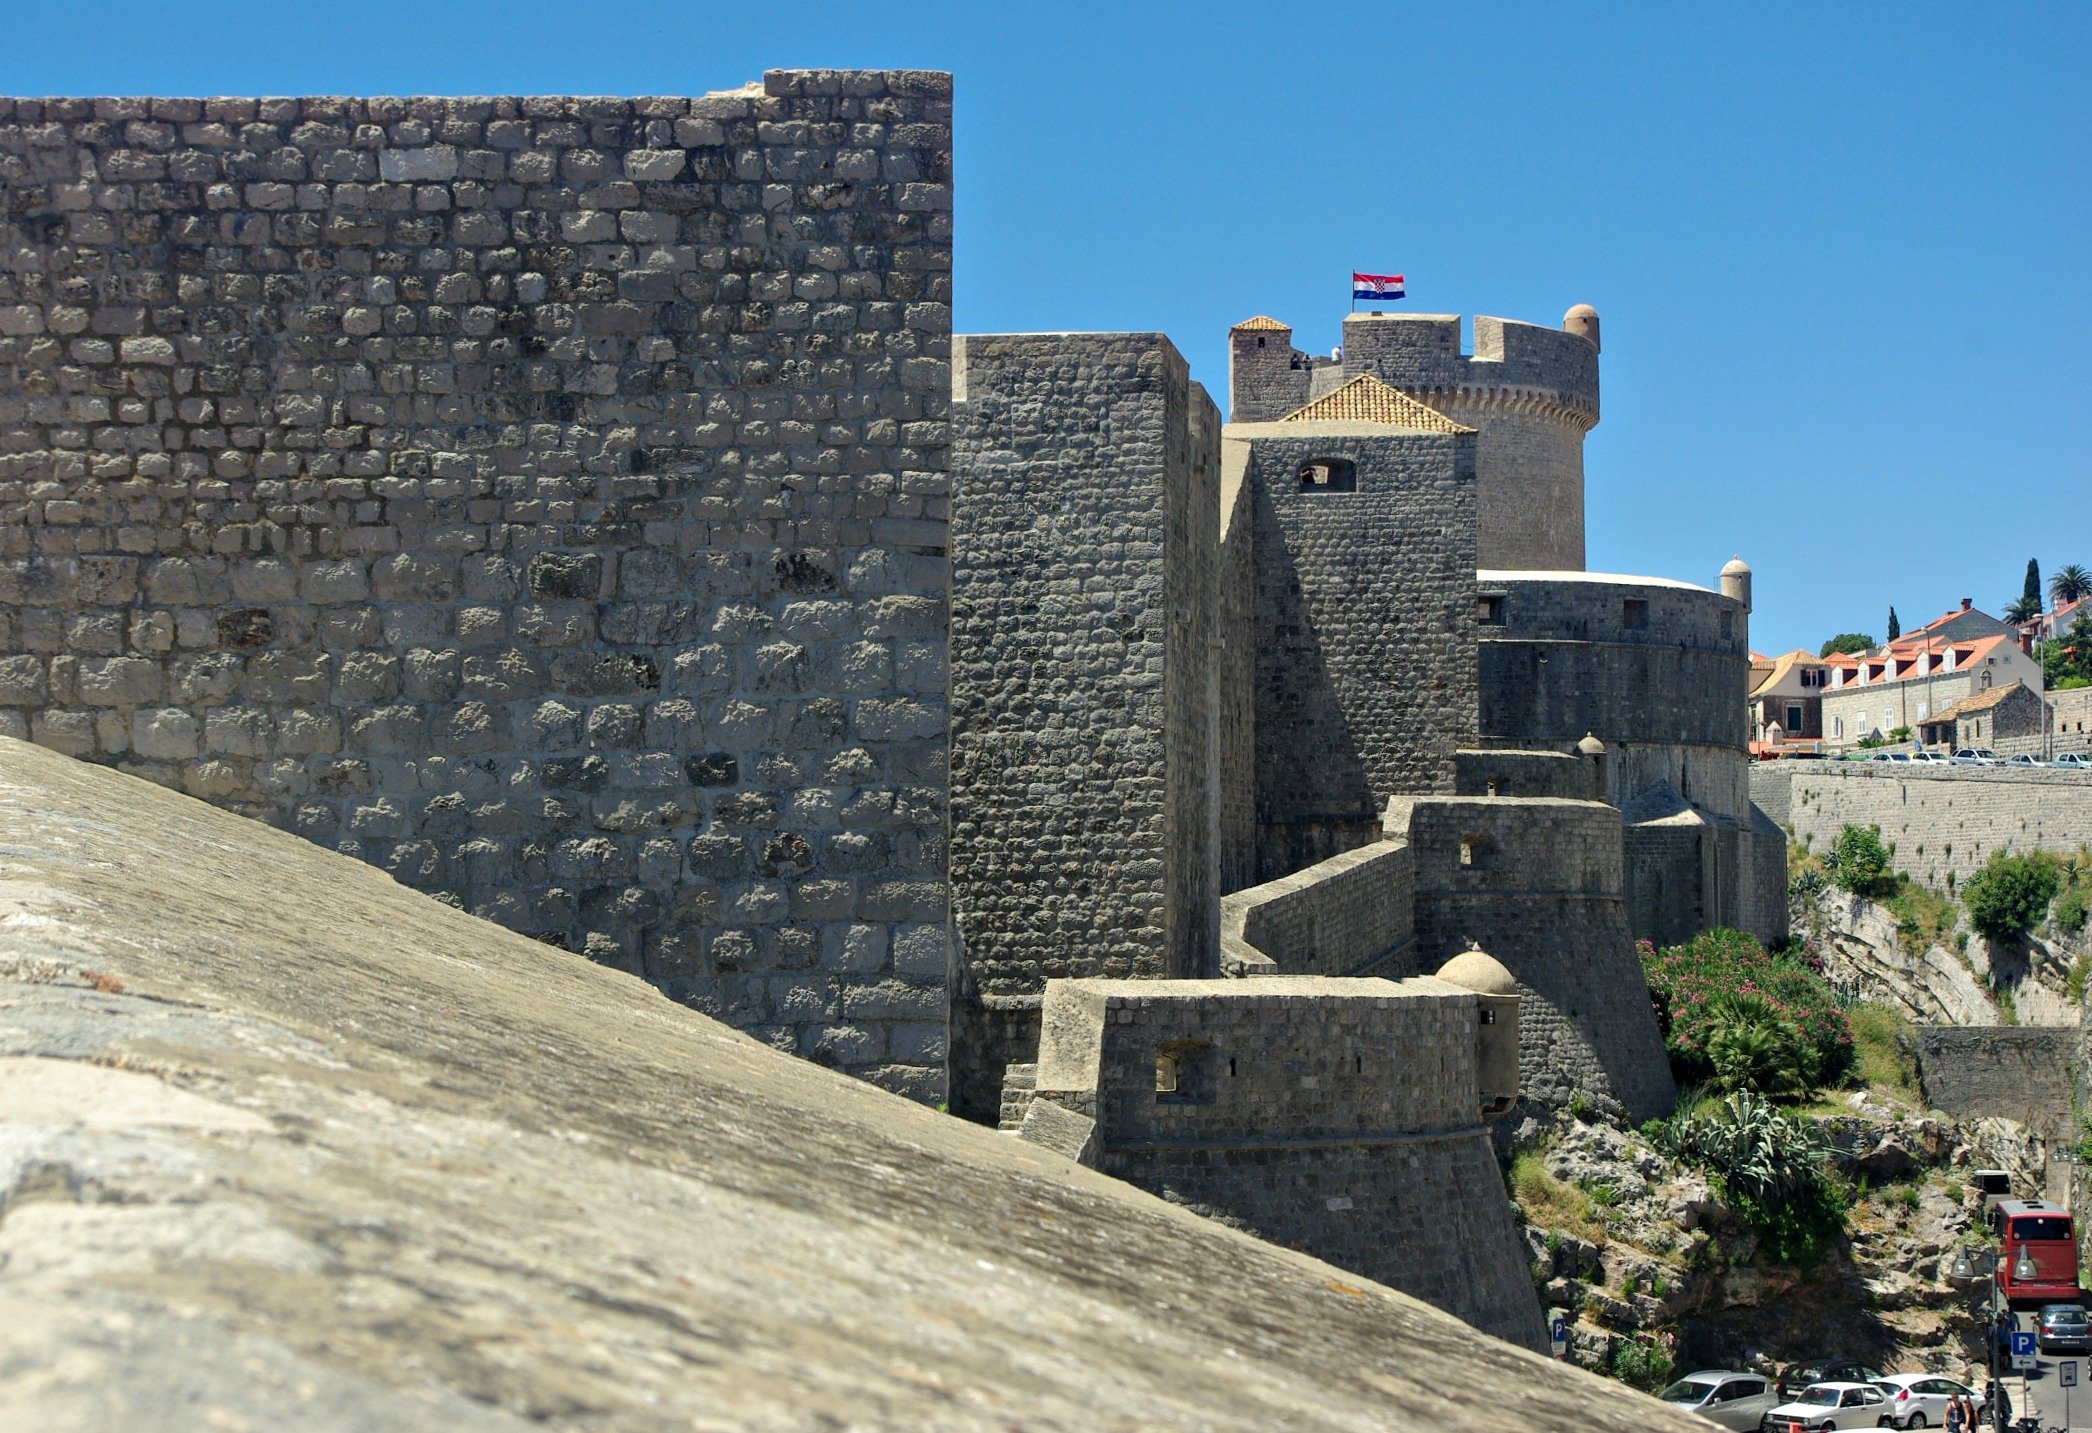 Dubrovnik walls and tower